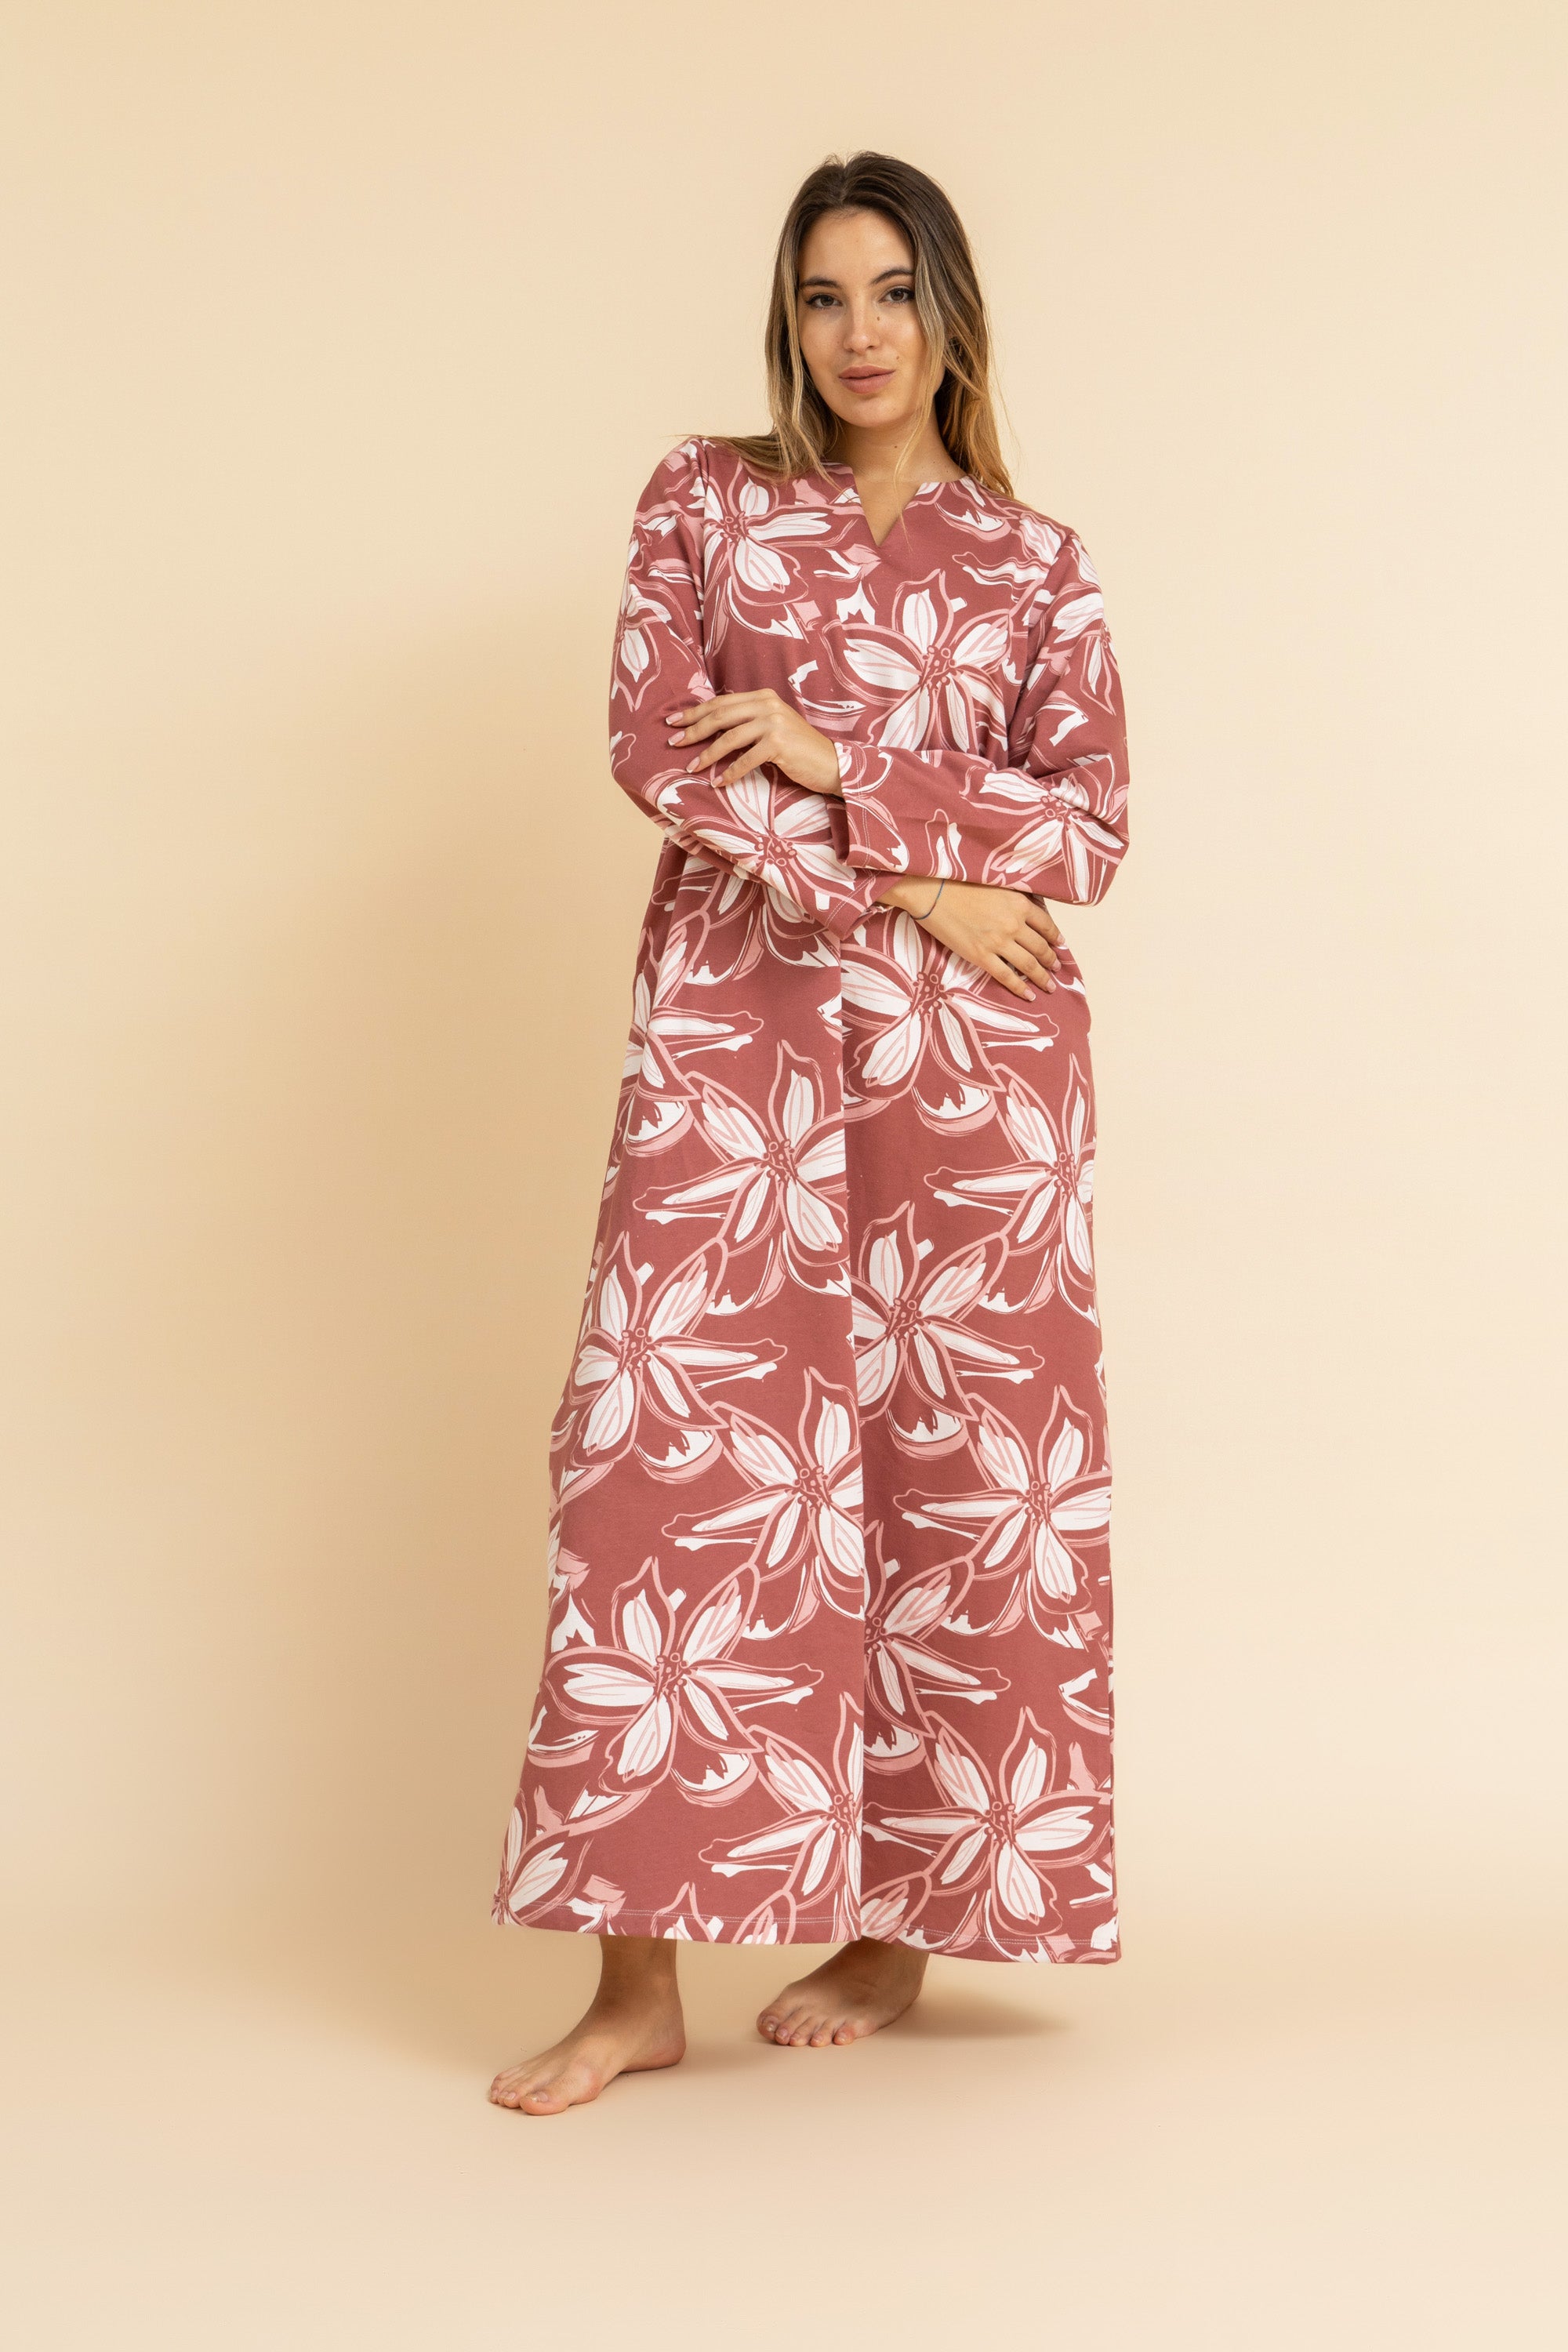 Floral strokes Long Sleeve Nightgown